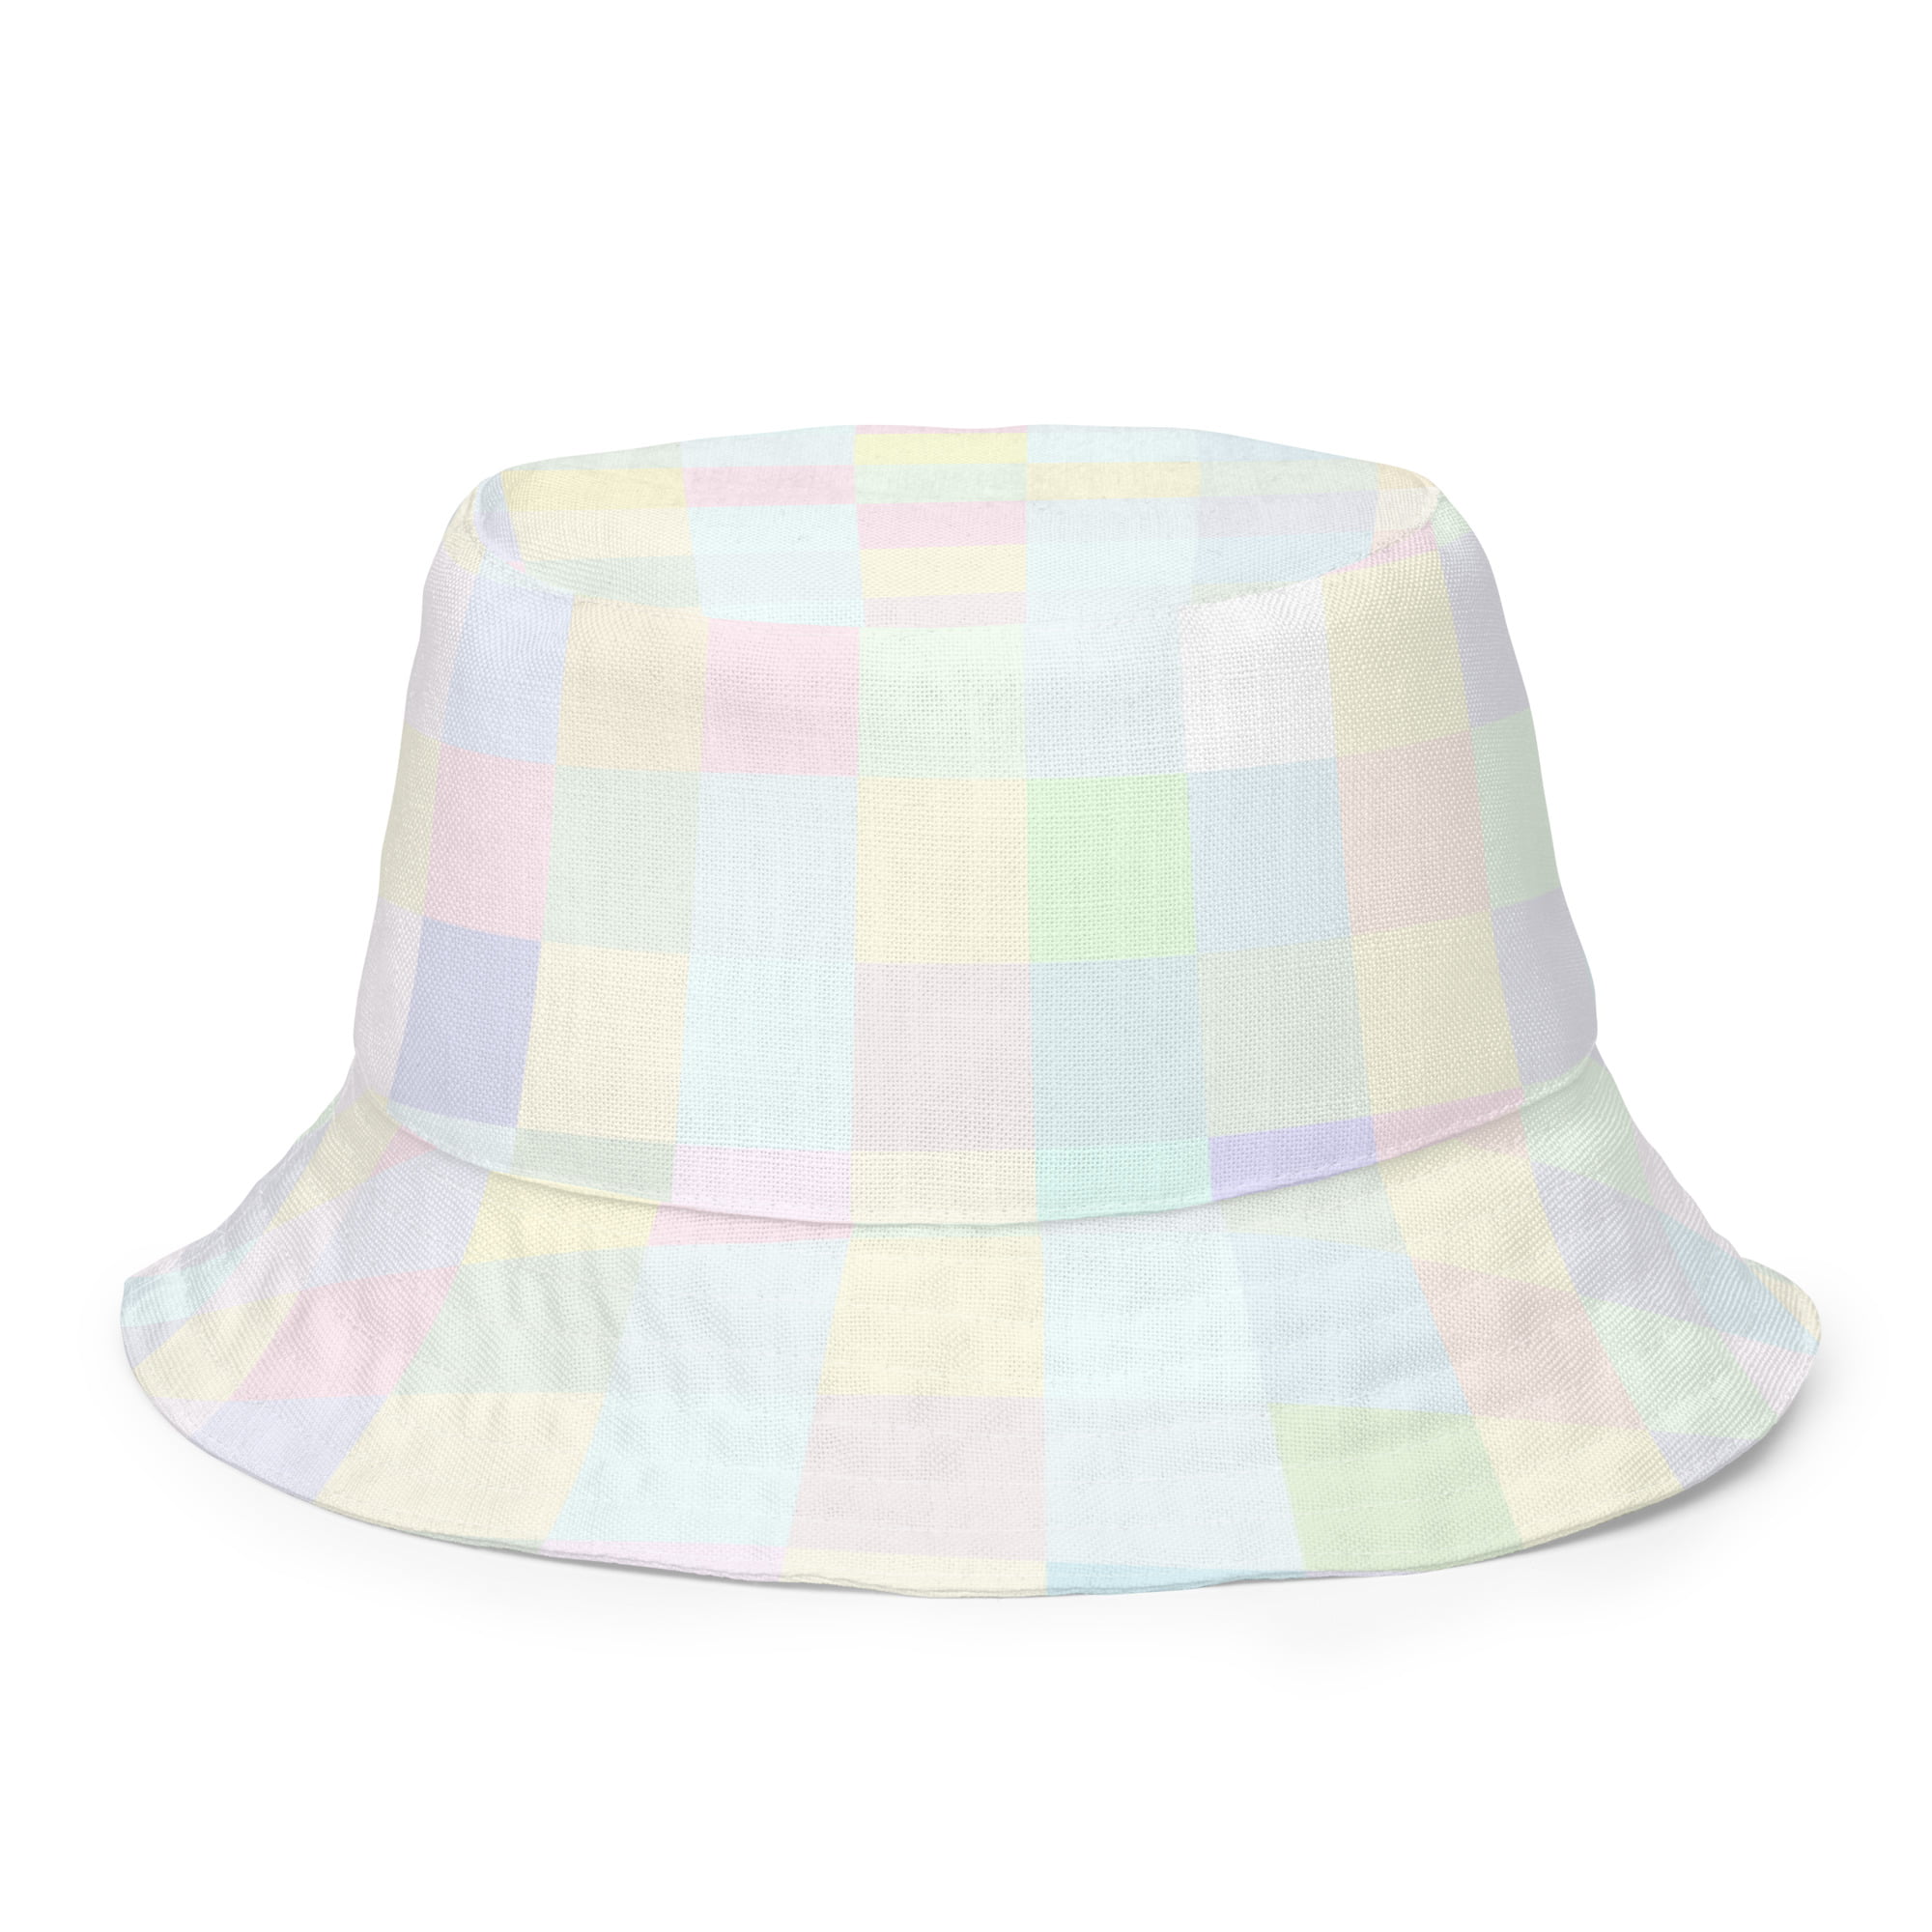 all over print reversible bucket hat white front outside 6510a85d1d007.jpg